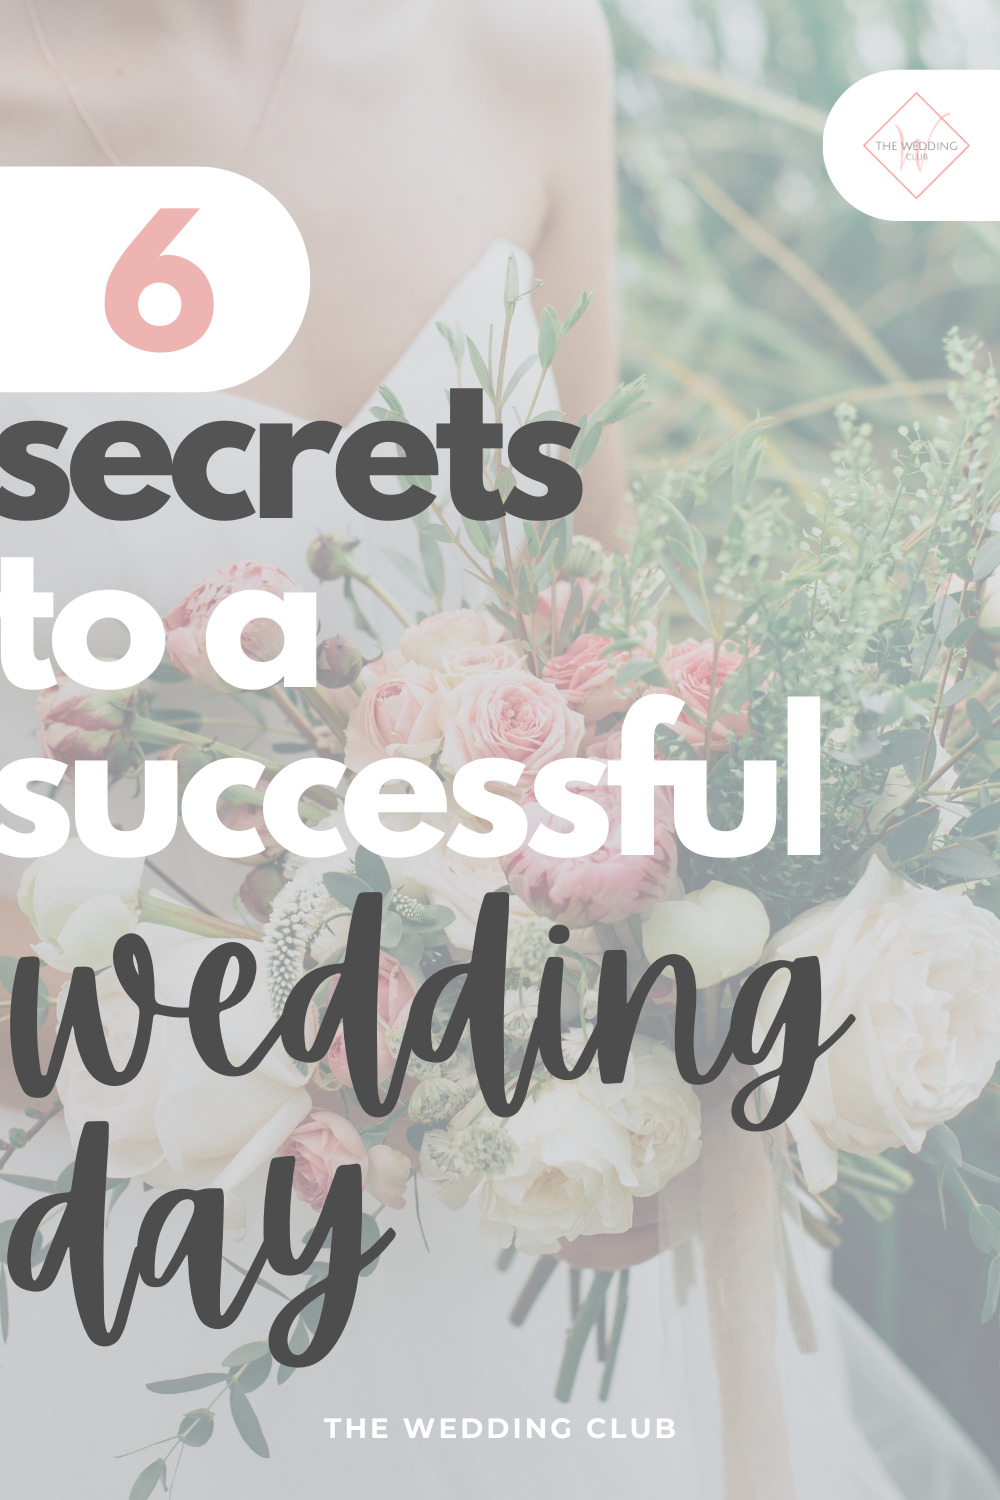 6 Secrets to a successful wedding day